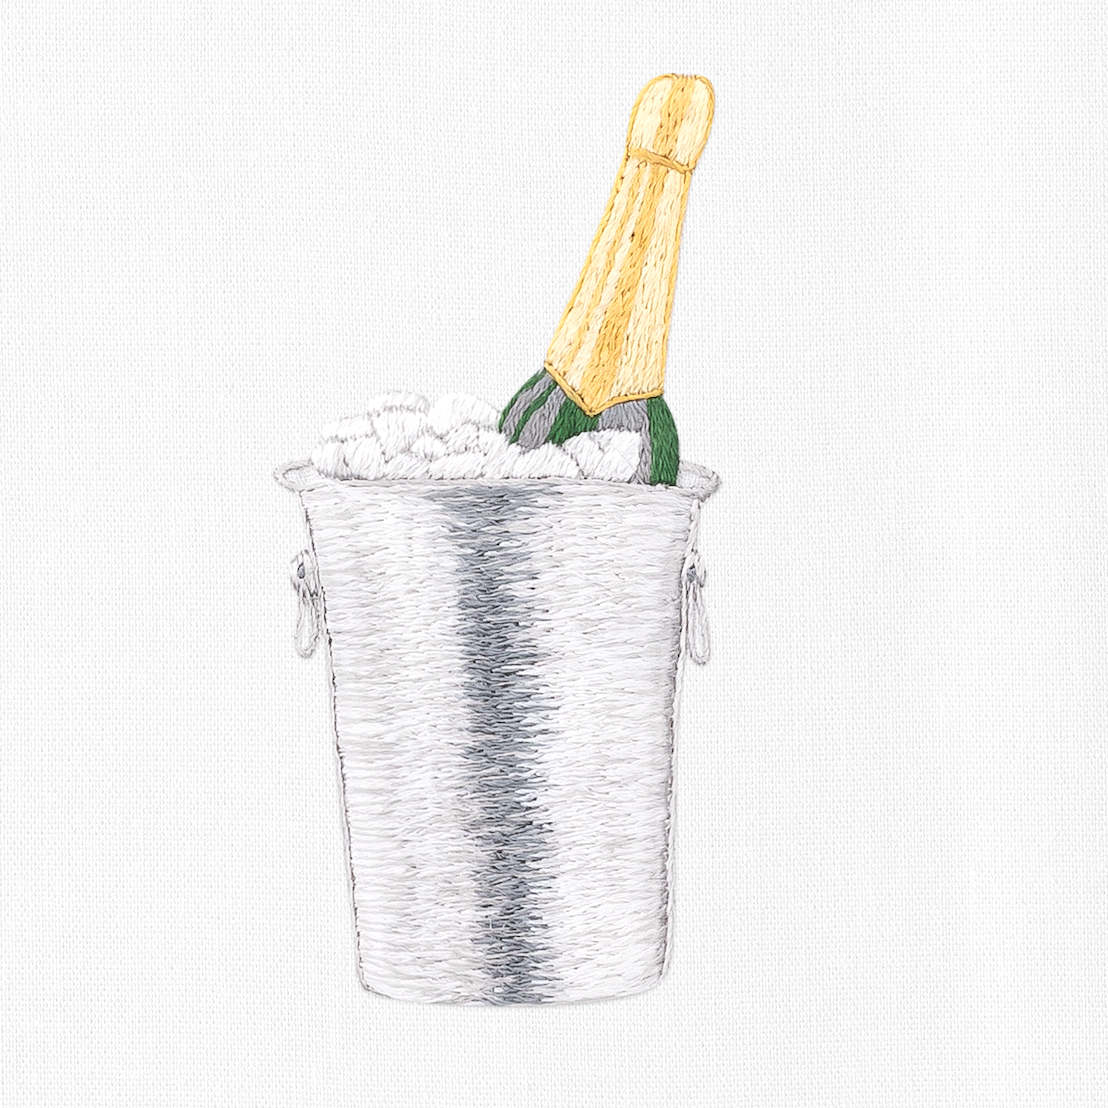 A close up detailed image of the embroidery - A green, gold-capped champagne bottle in a silver ice bucket.